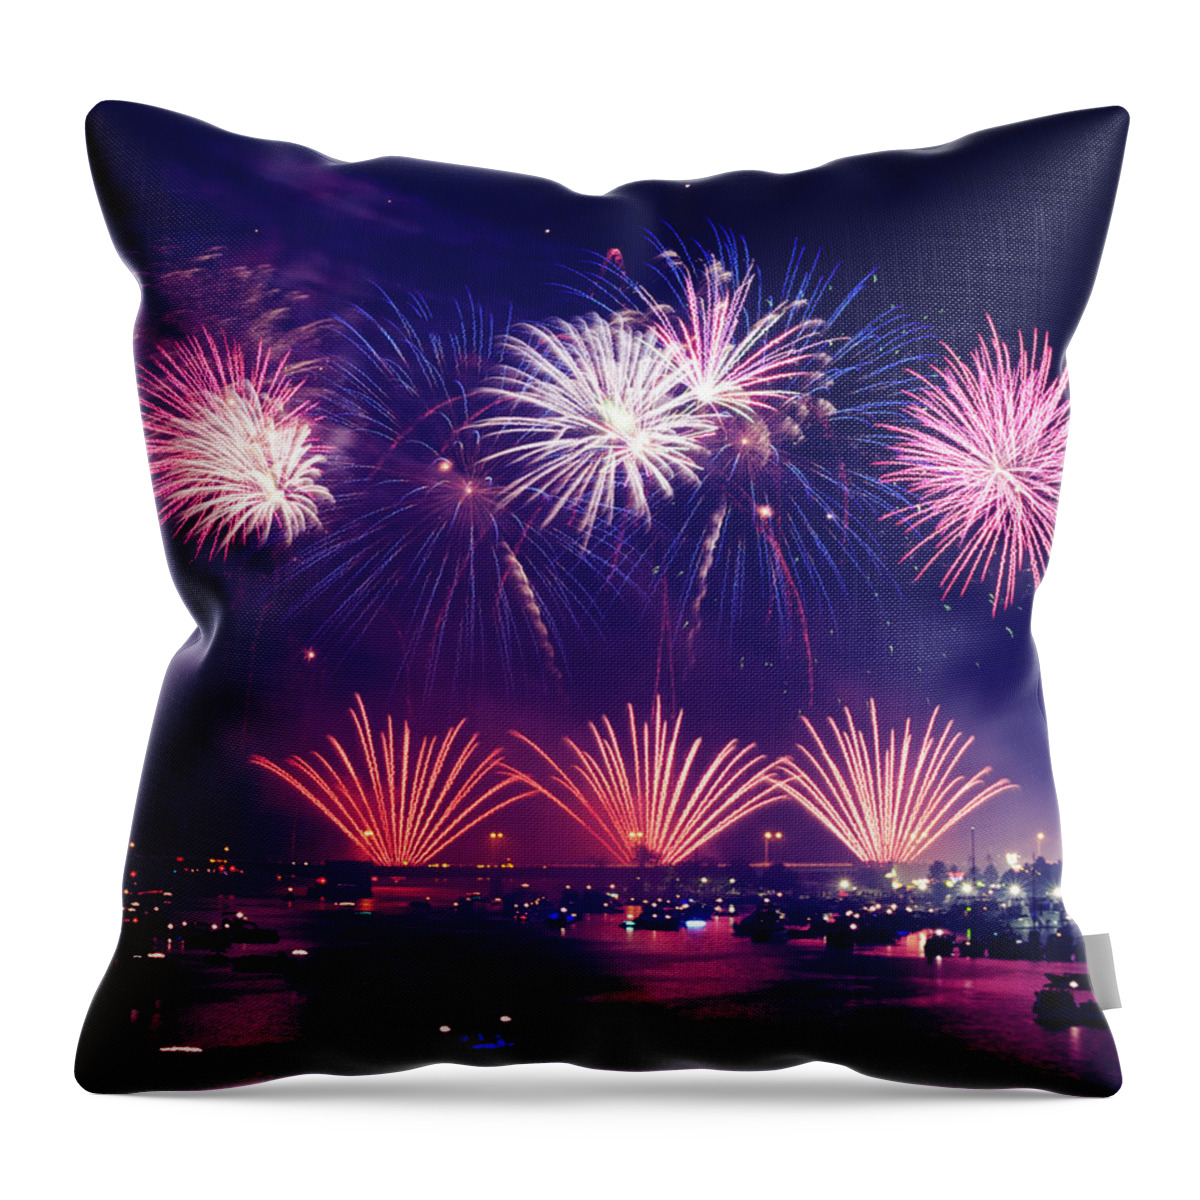 New Year's Eve Throw Pillow featuring the photograph New Year's Eve by Aaron Burden